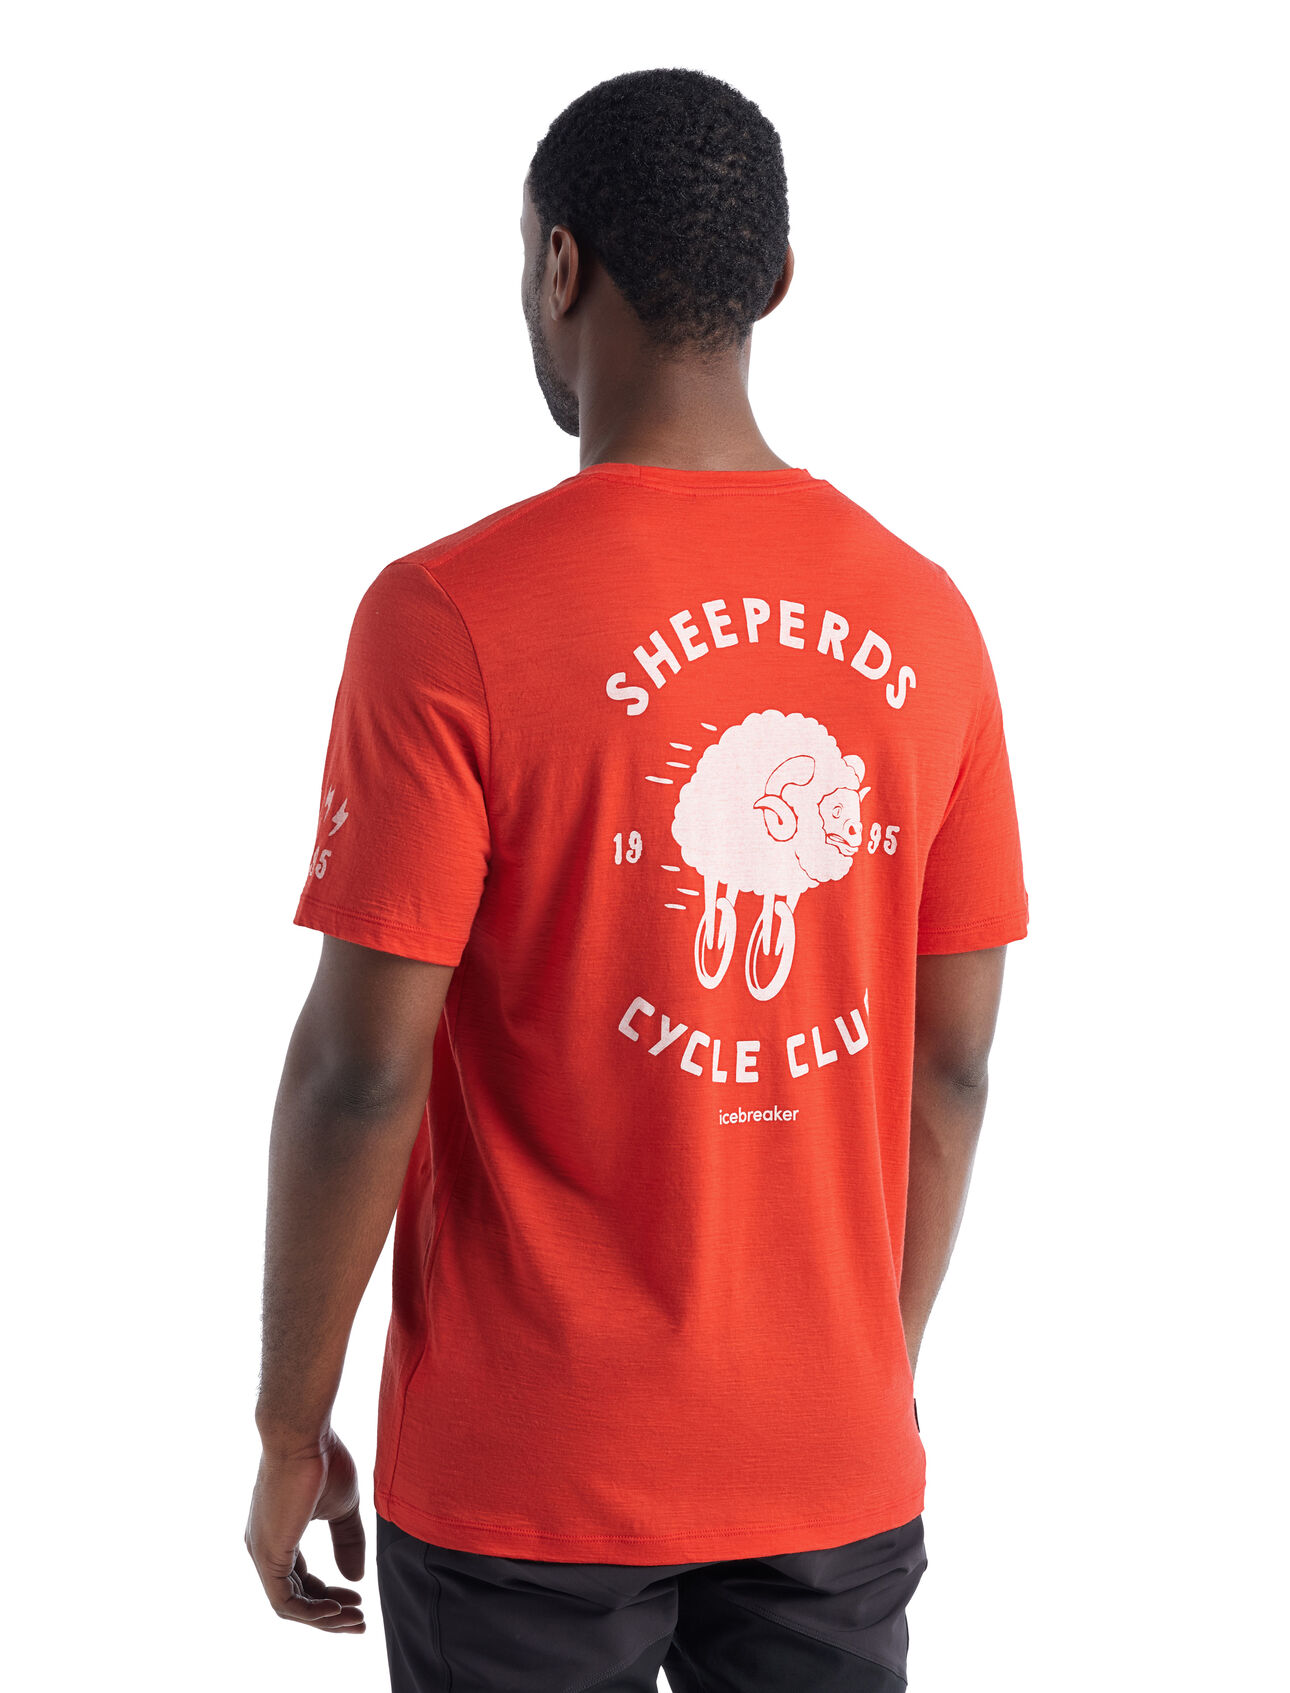 Mens Merino Tech Lite II Short Sleeve T-Shirt Sheeperds Cycle Club Our versatile Tech Tee that provides comfort, breathability and odor-resistance for any adventure you can think of, the Tech Lite II Short Sleeve Tee Sheeperds Cycle Club features 100% merino for all-natural performance. The original artwork features a whimsical illustration of sheep on the move.